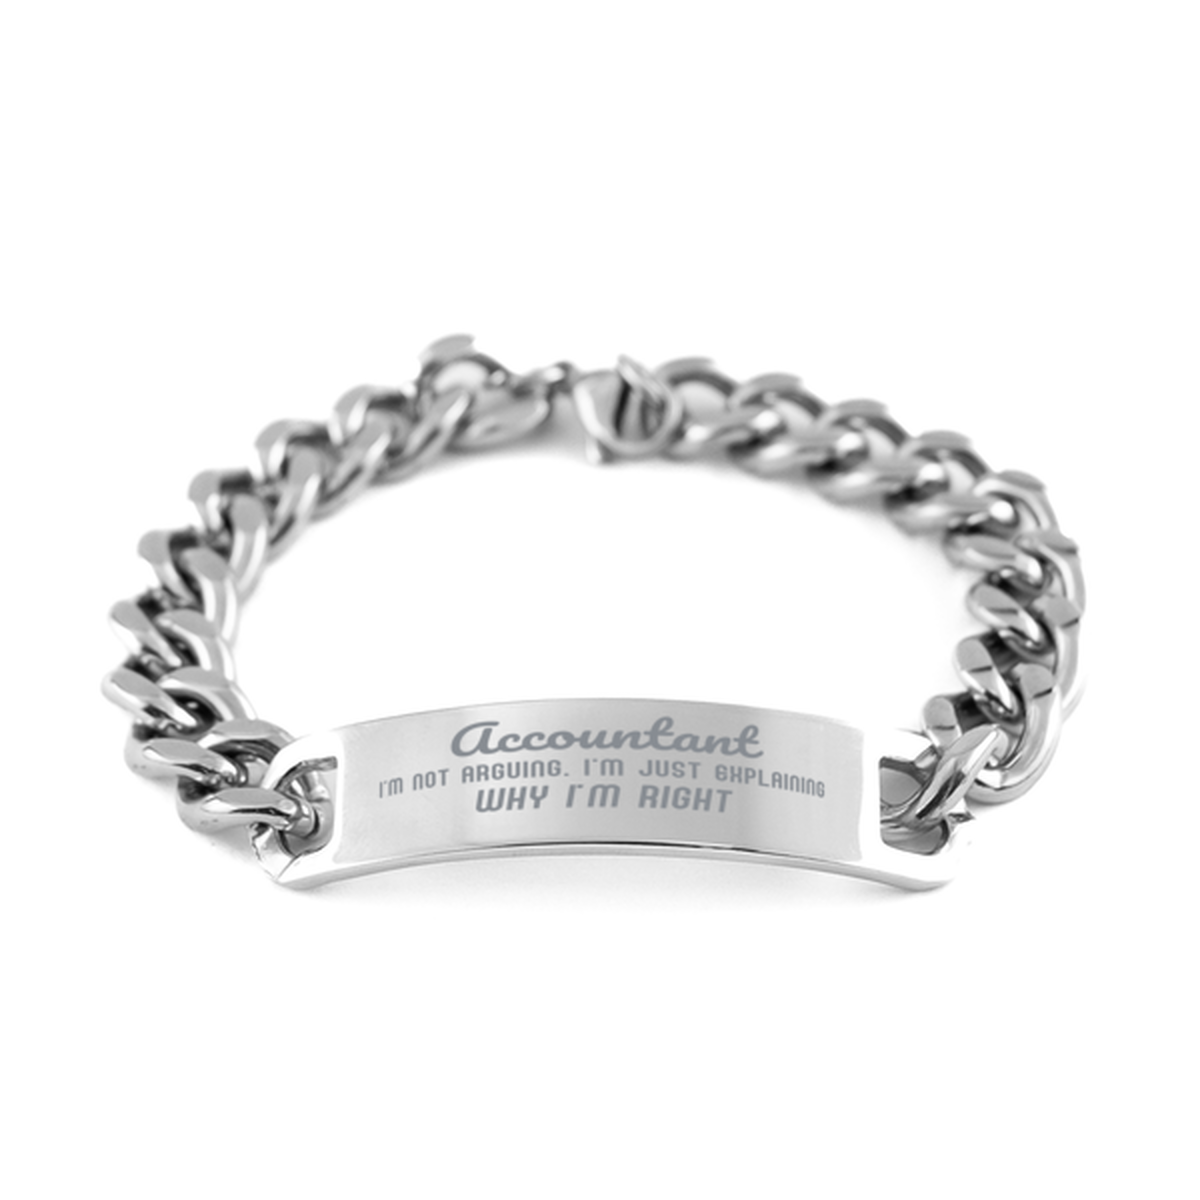 Accountant I'm not Arguing. I'm Just Explaining Why I'm RIGHT Cuban Chain Stainless Steel Bracelet, Graduation Birthday Christmas Accountant Gifts For Accountant Funny Saying Quote Present for Men Women Coworker